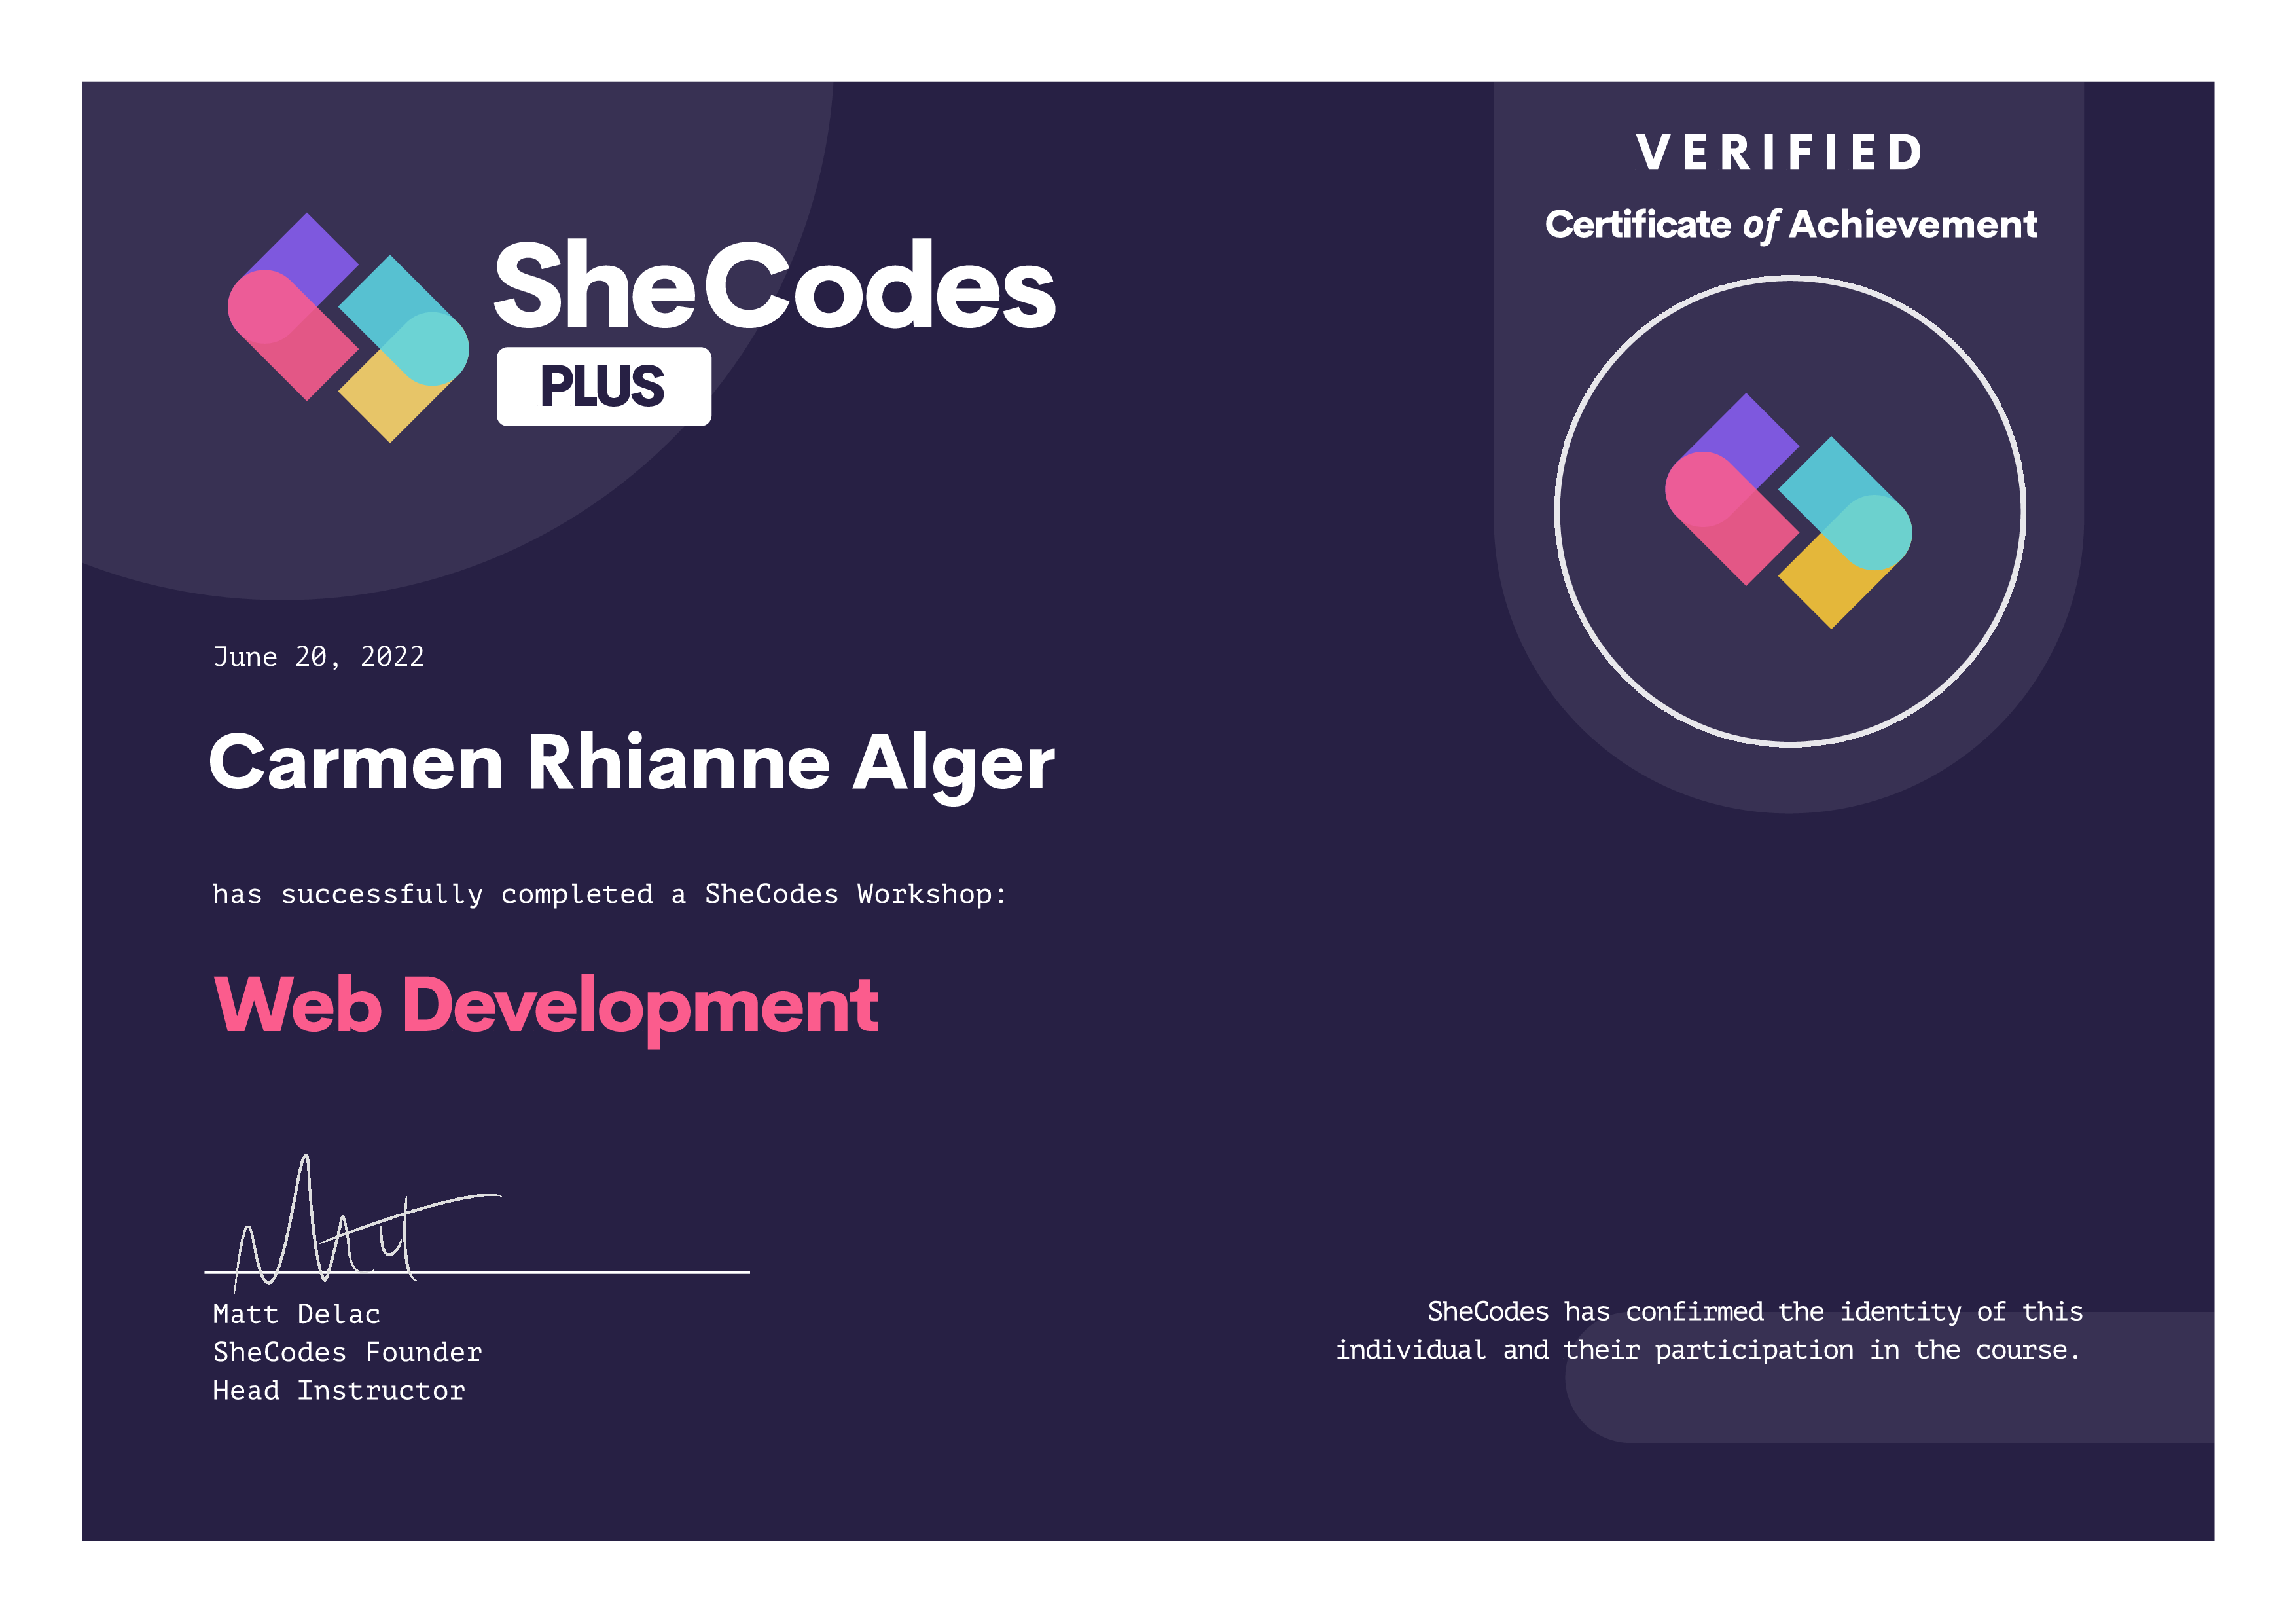 A certificate for the SheCodes Plus course